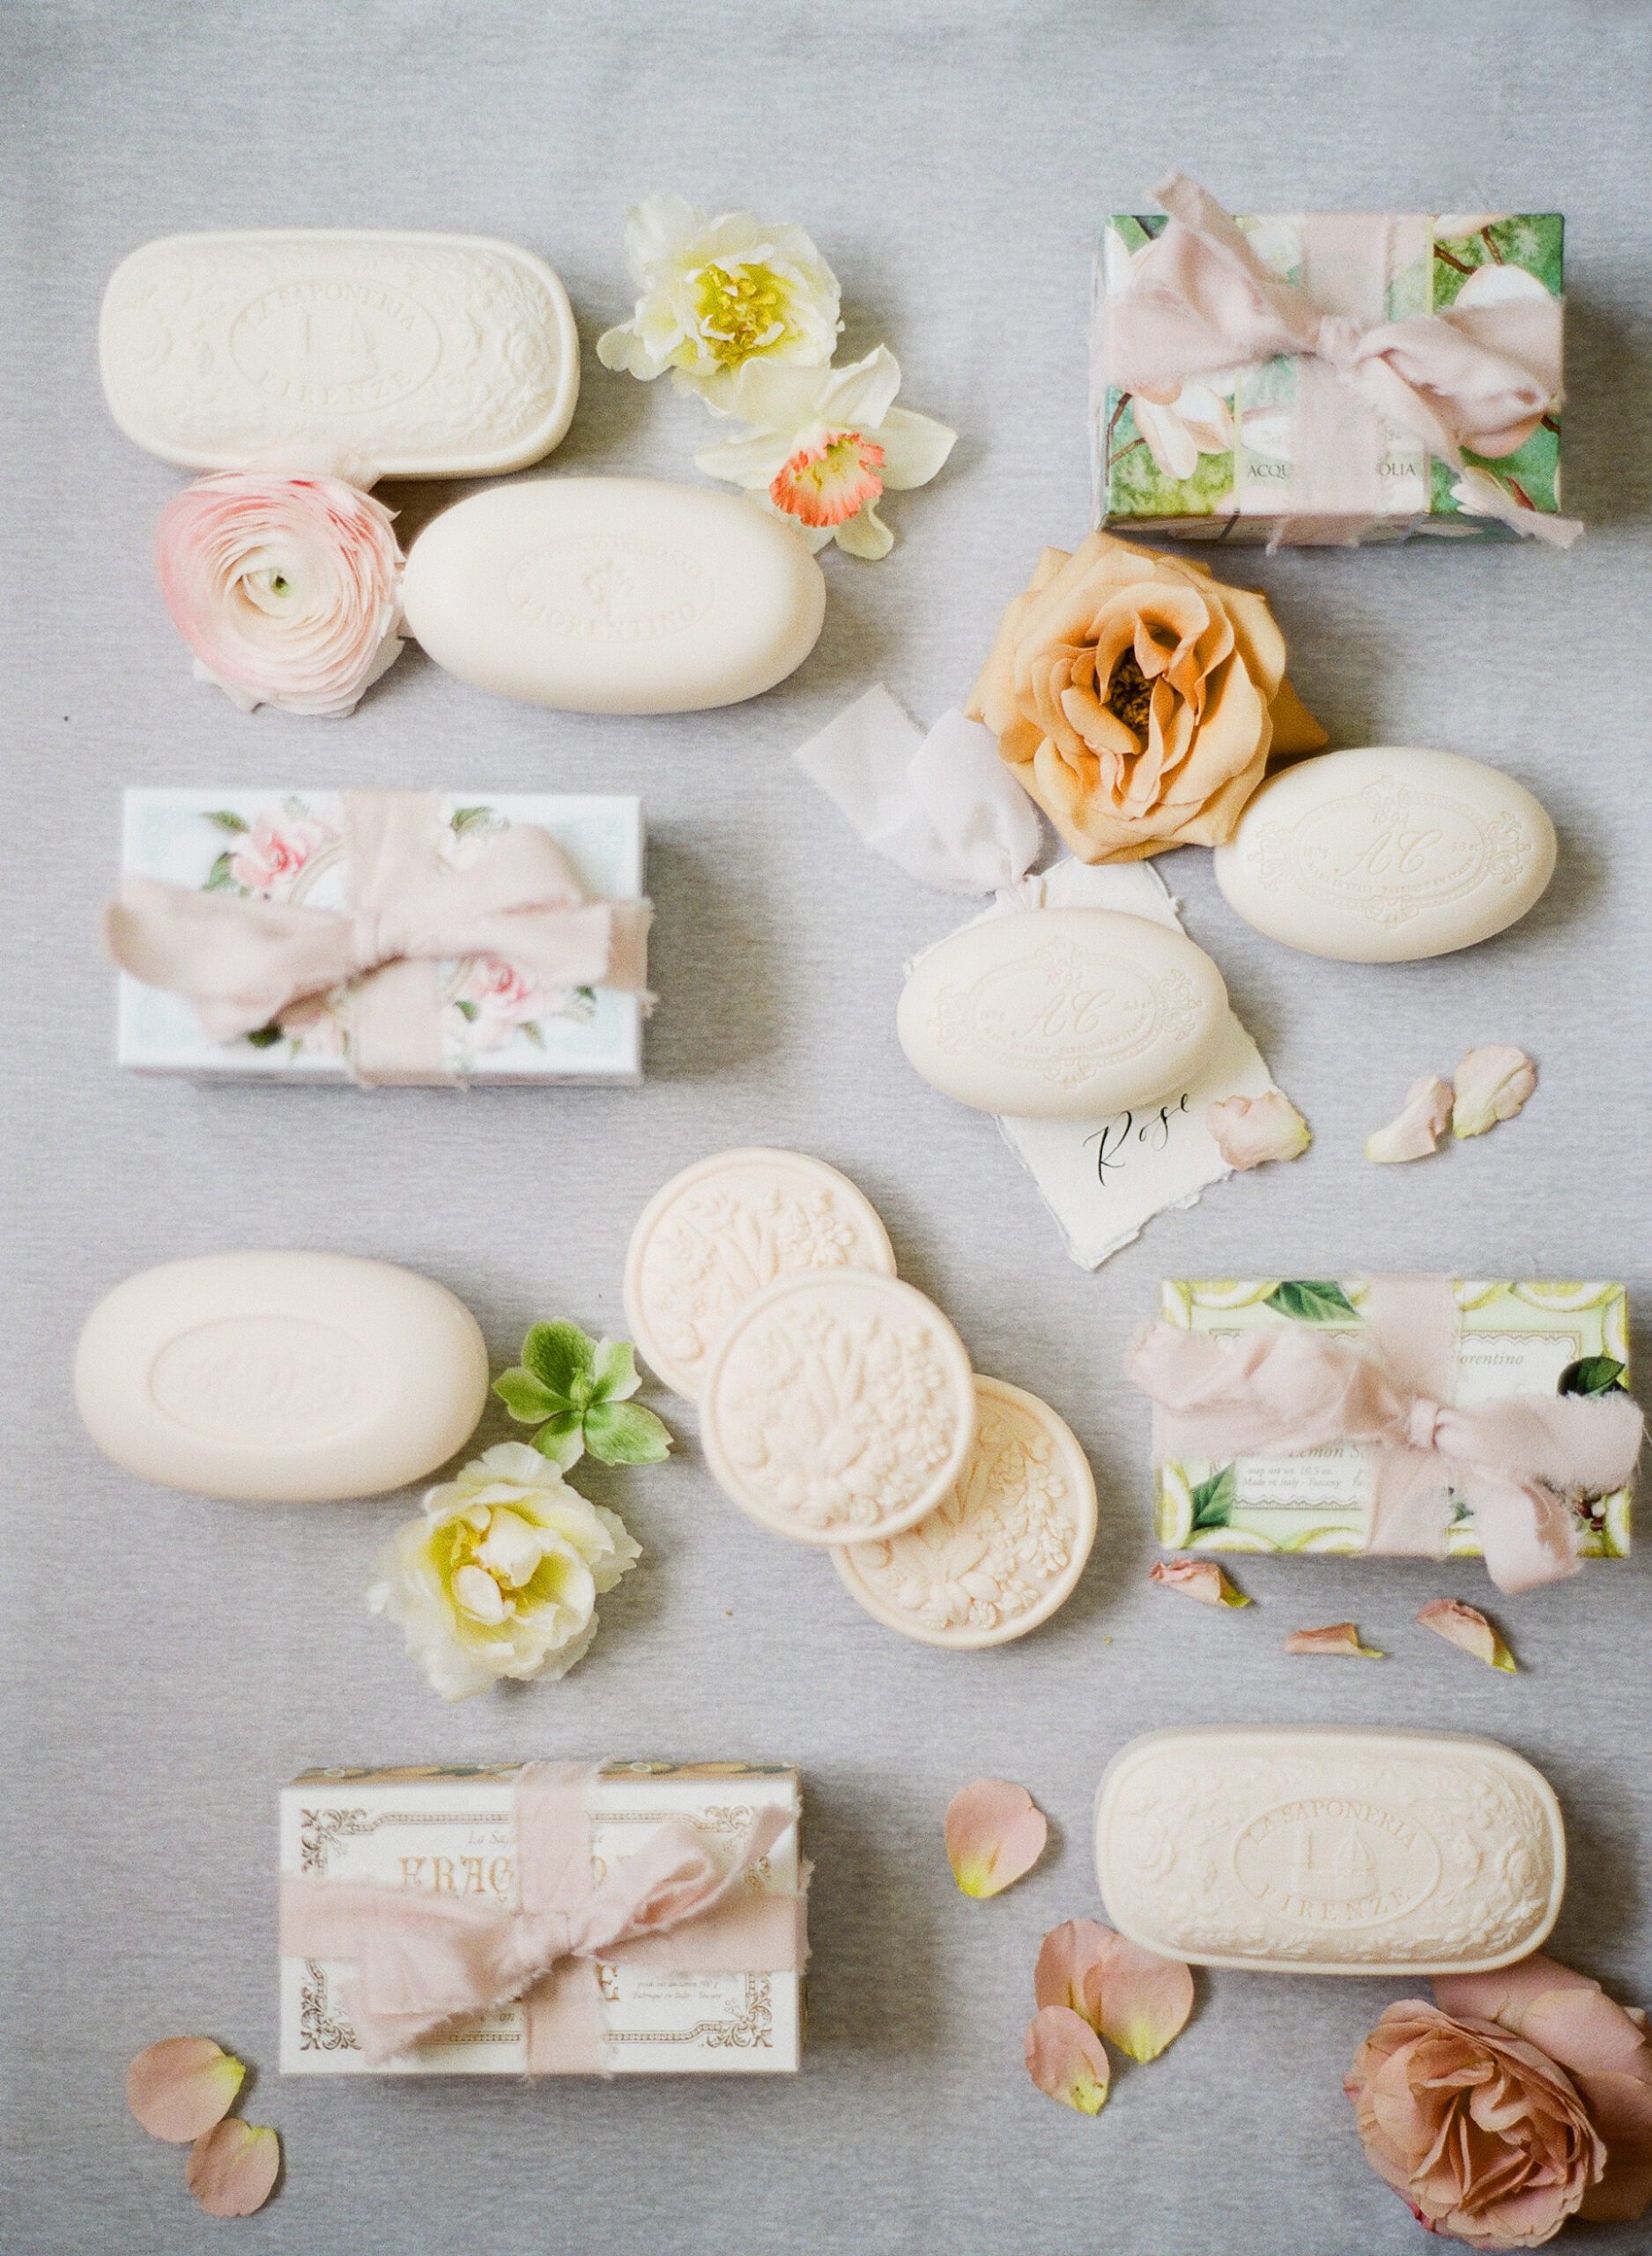 A detail shot of a business's many different soaps and packaging details for brand photography